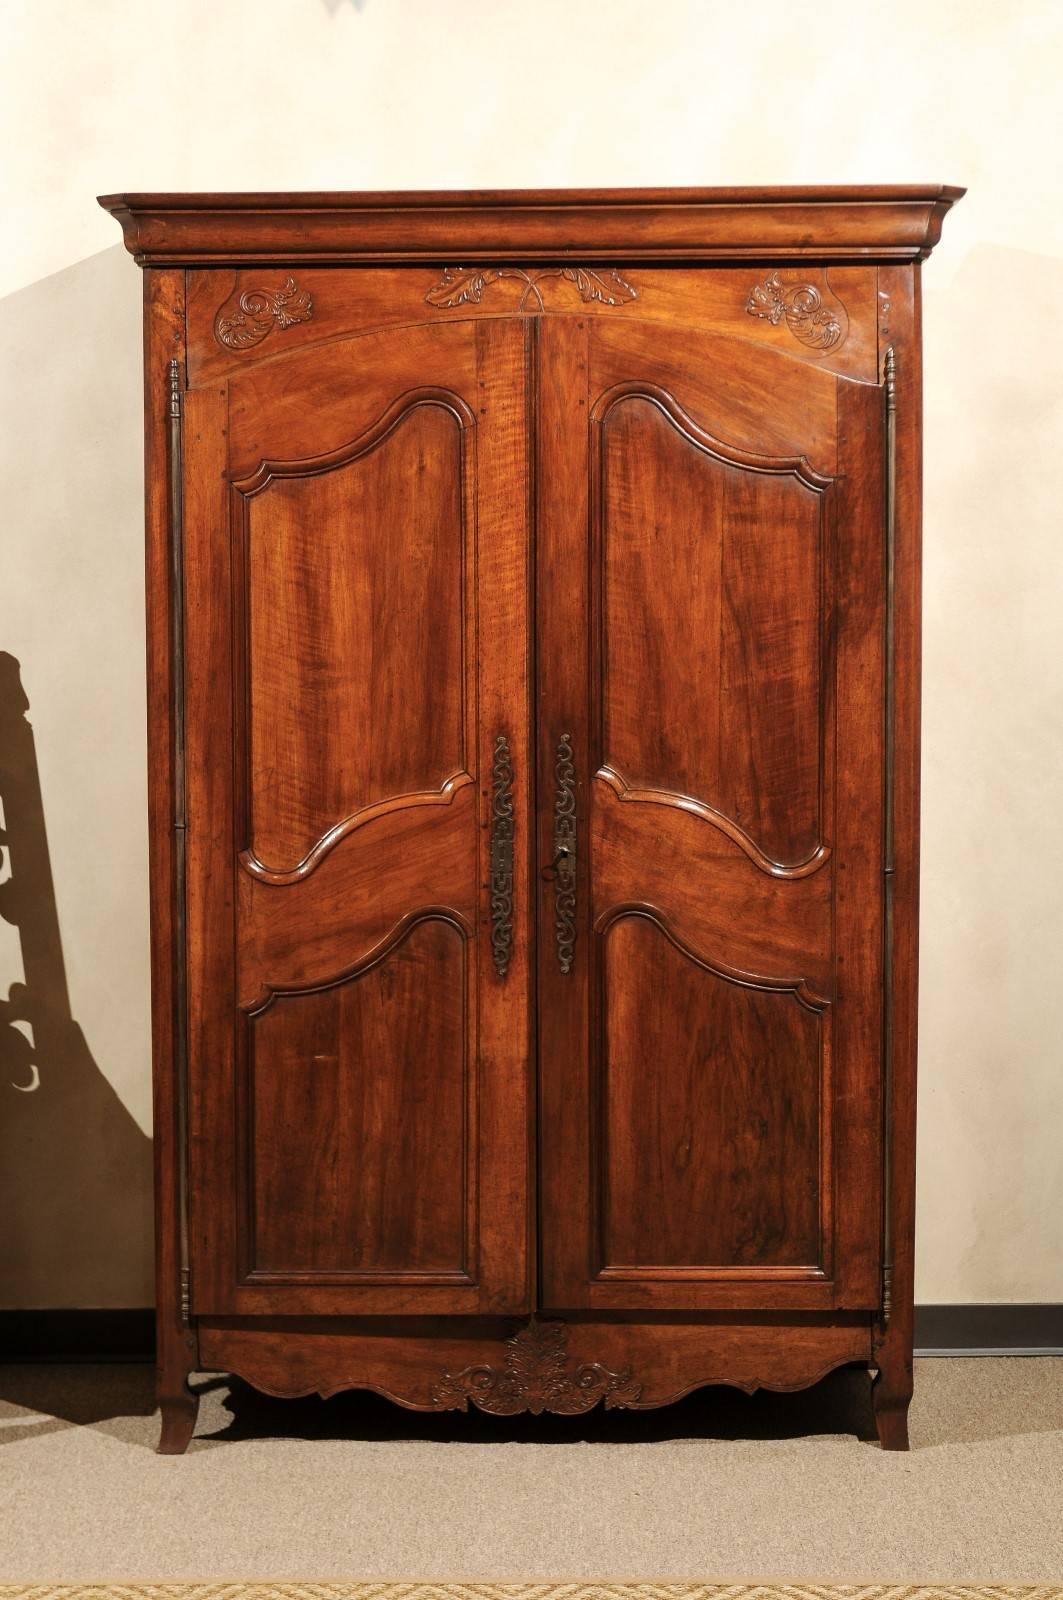 19th century French cherry armoire, circa 1860
This is a modestly sized armoire with lovely leaves carved both under the cornice and on the apron. The size makes it versatile and good for smaller spaces. More and more of our clients using armoires